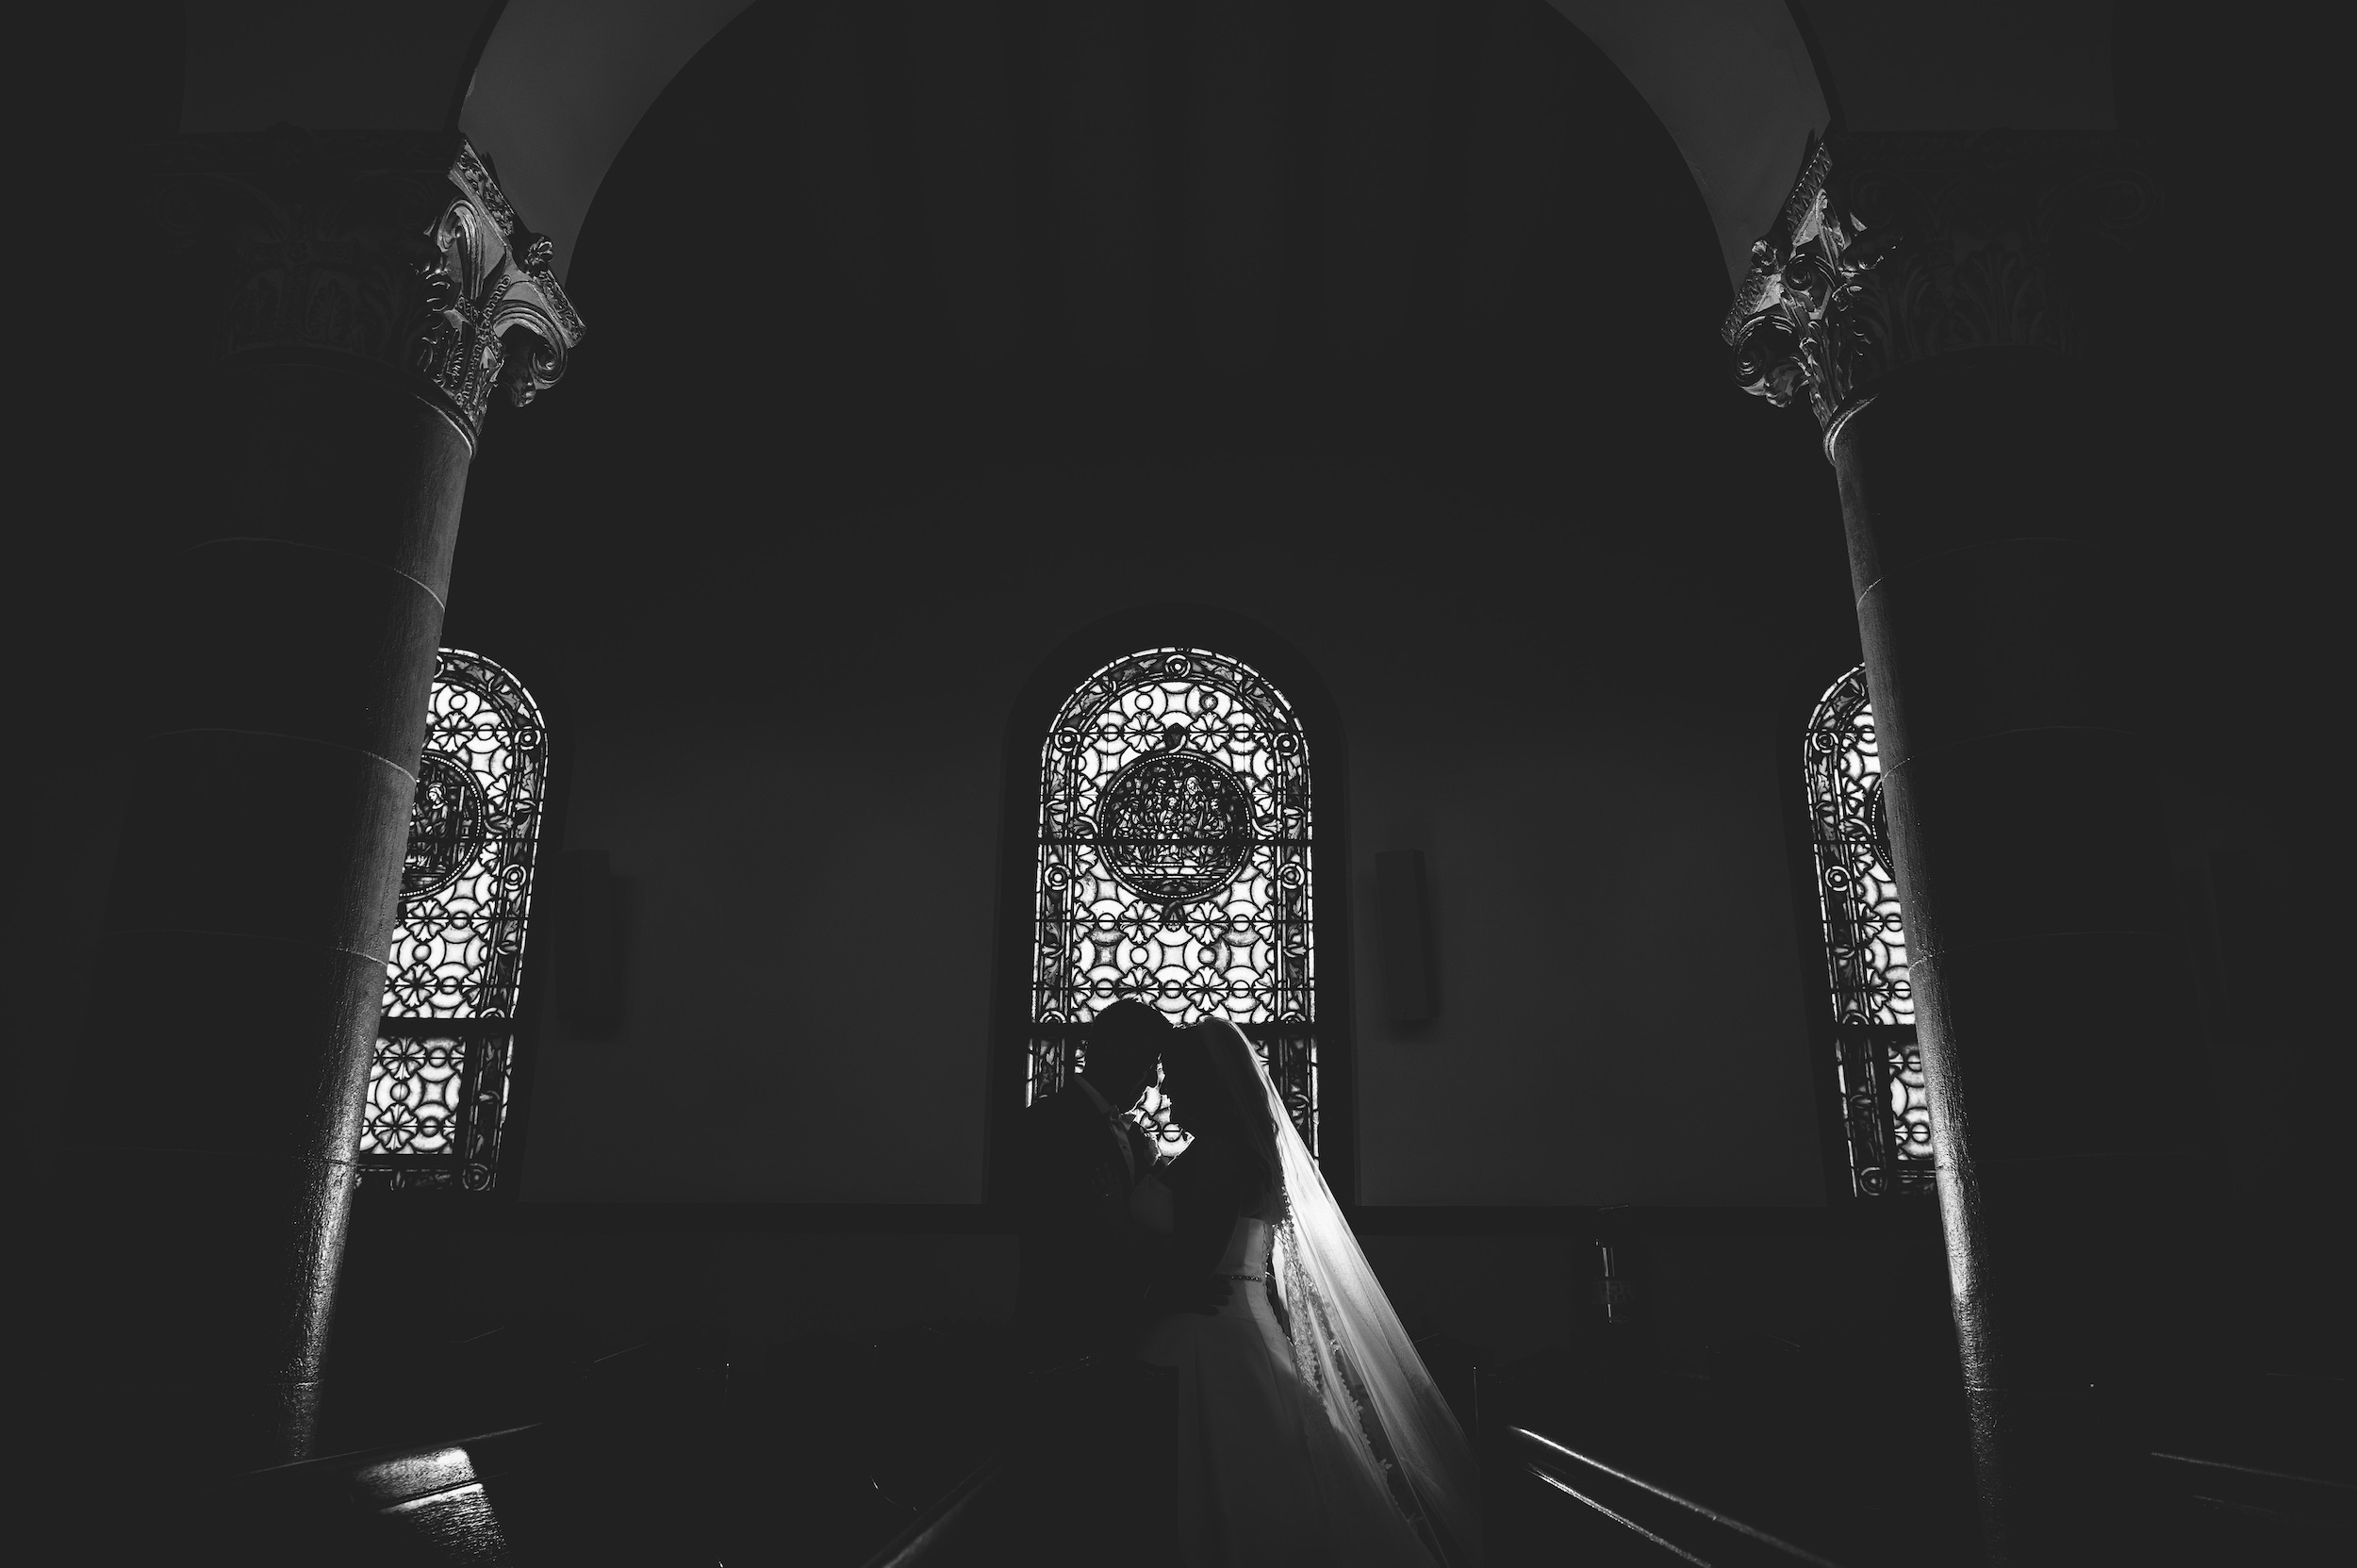 Bride and groom sillouhete at church